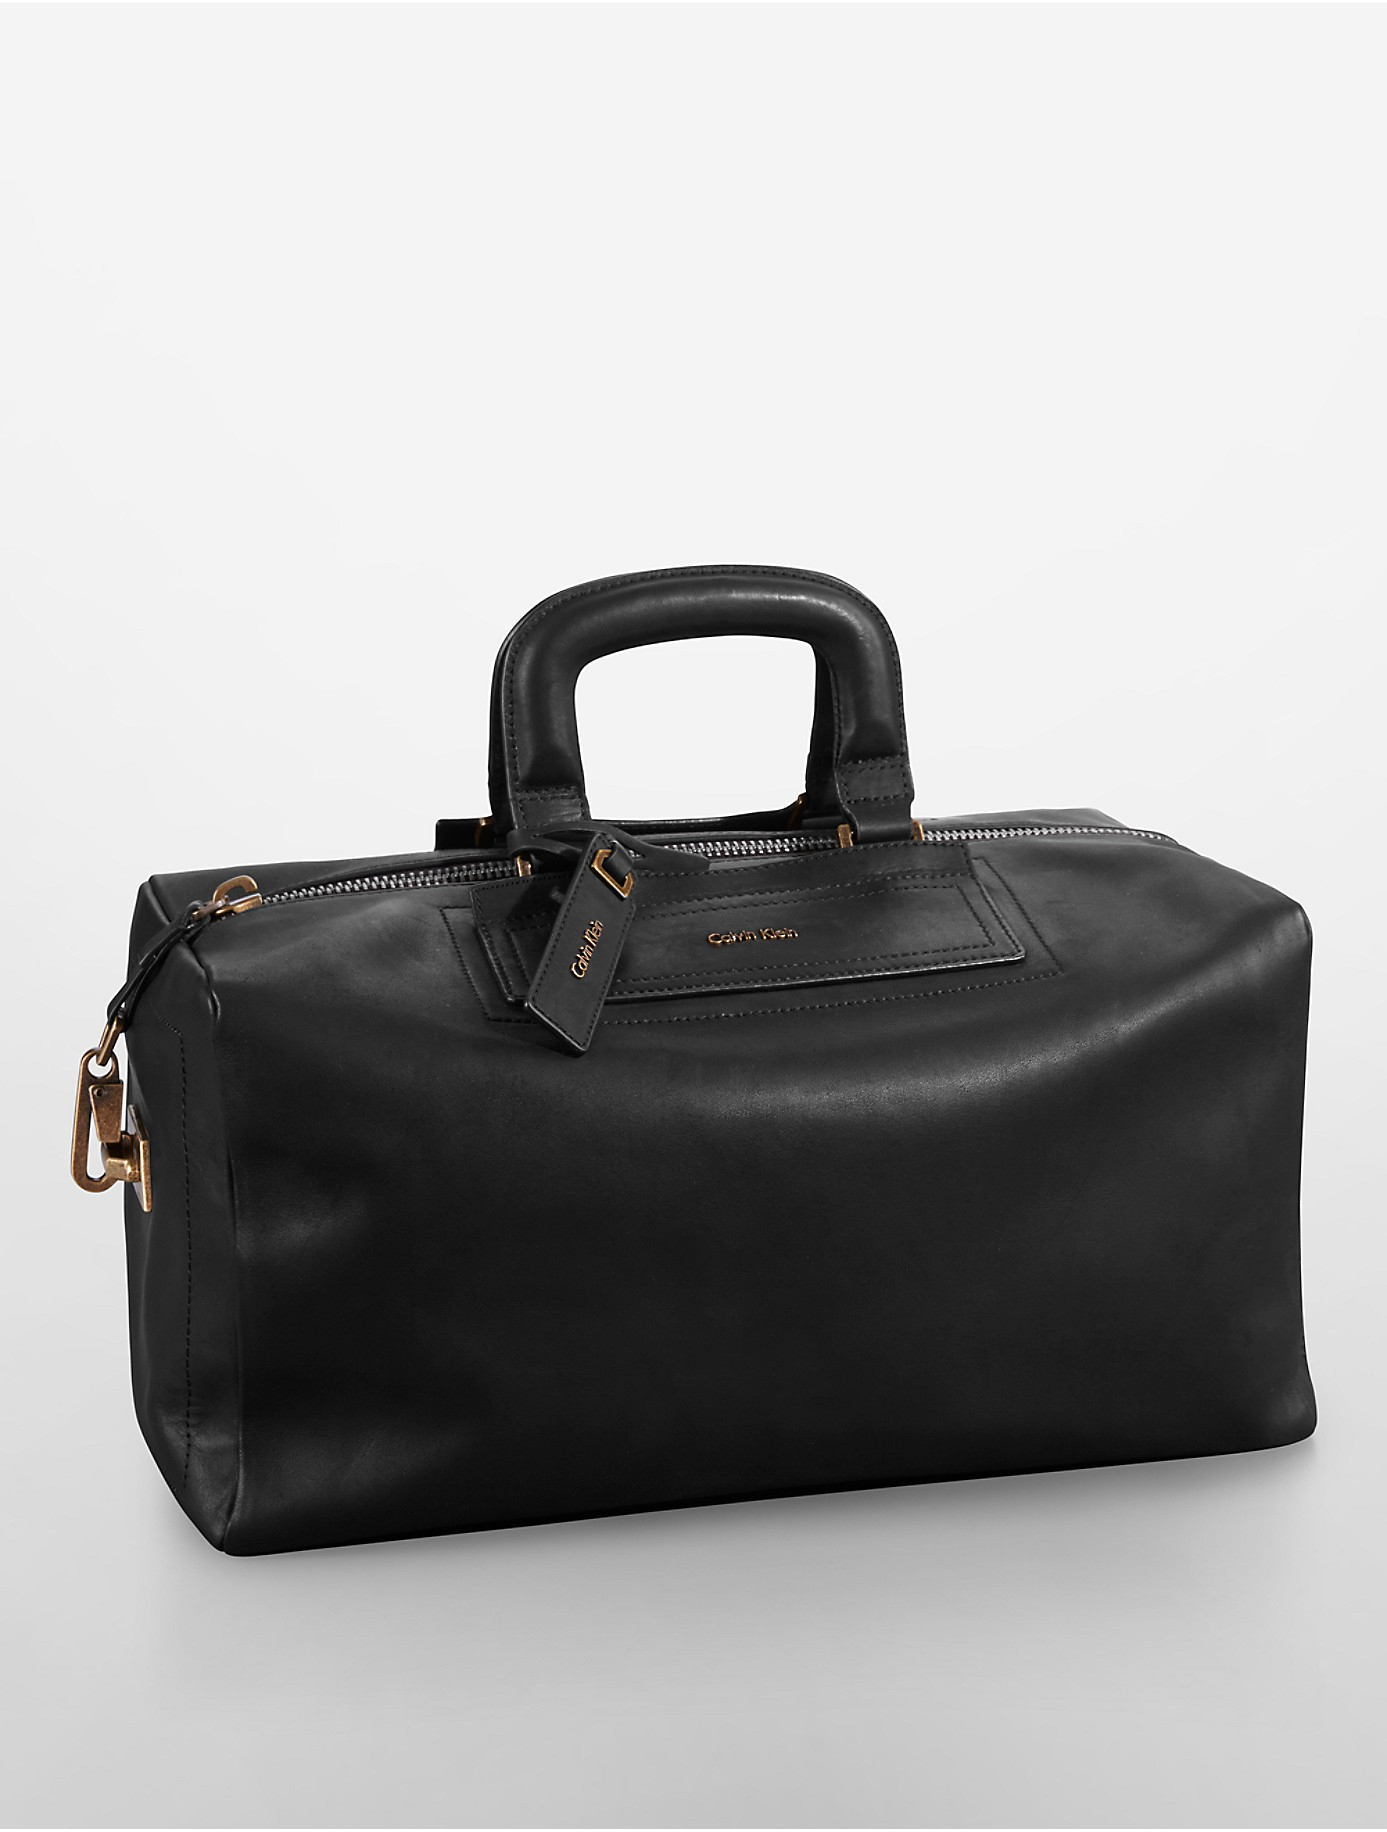 Lyst - Calvin klein Jeans Aster Leather Duffle Bag in Black